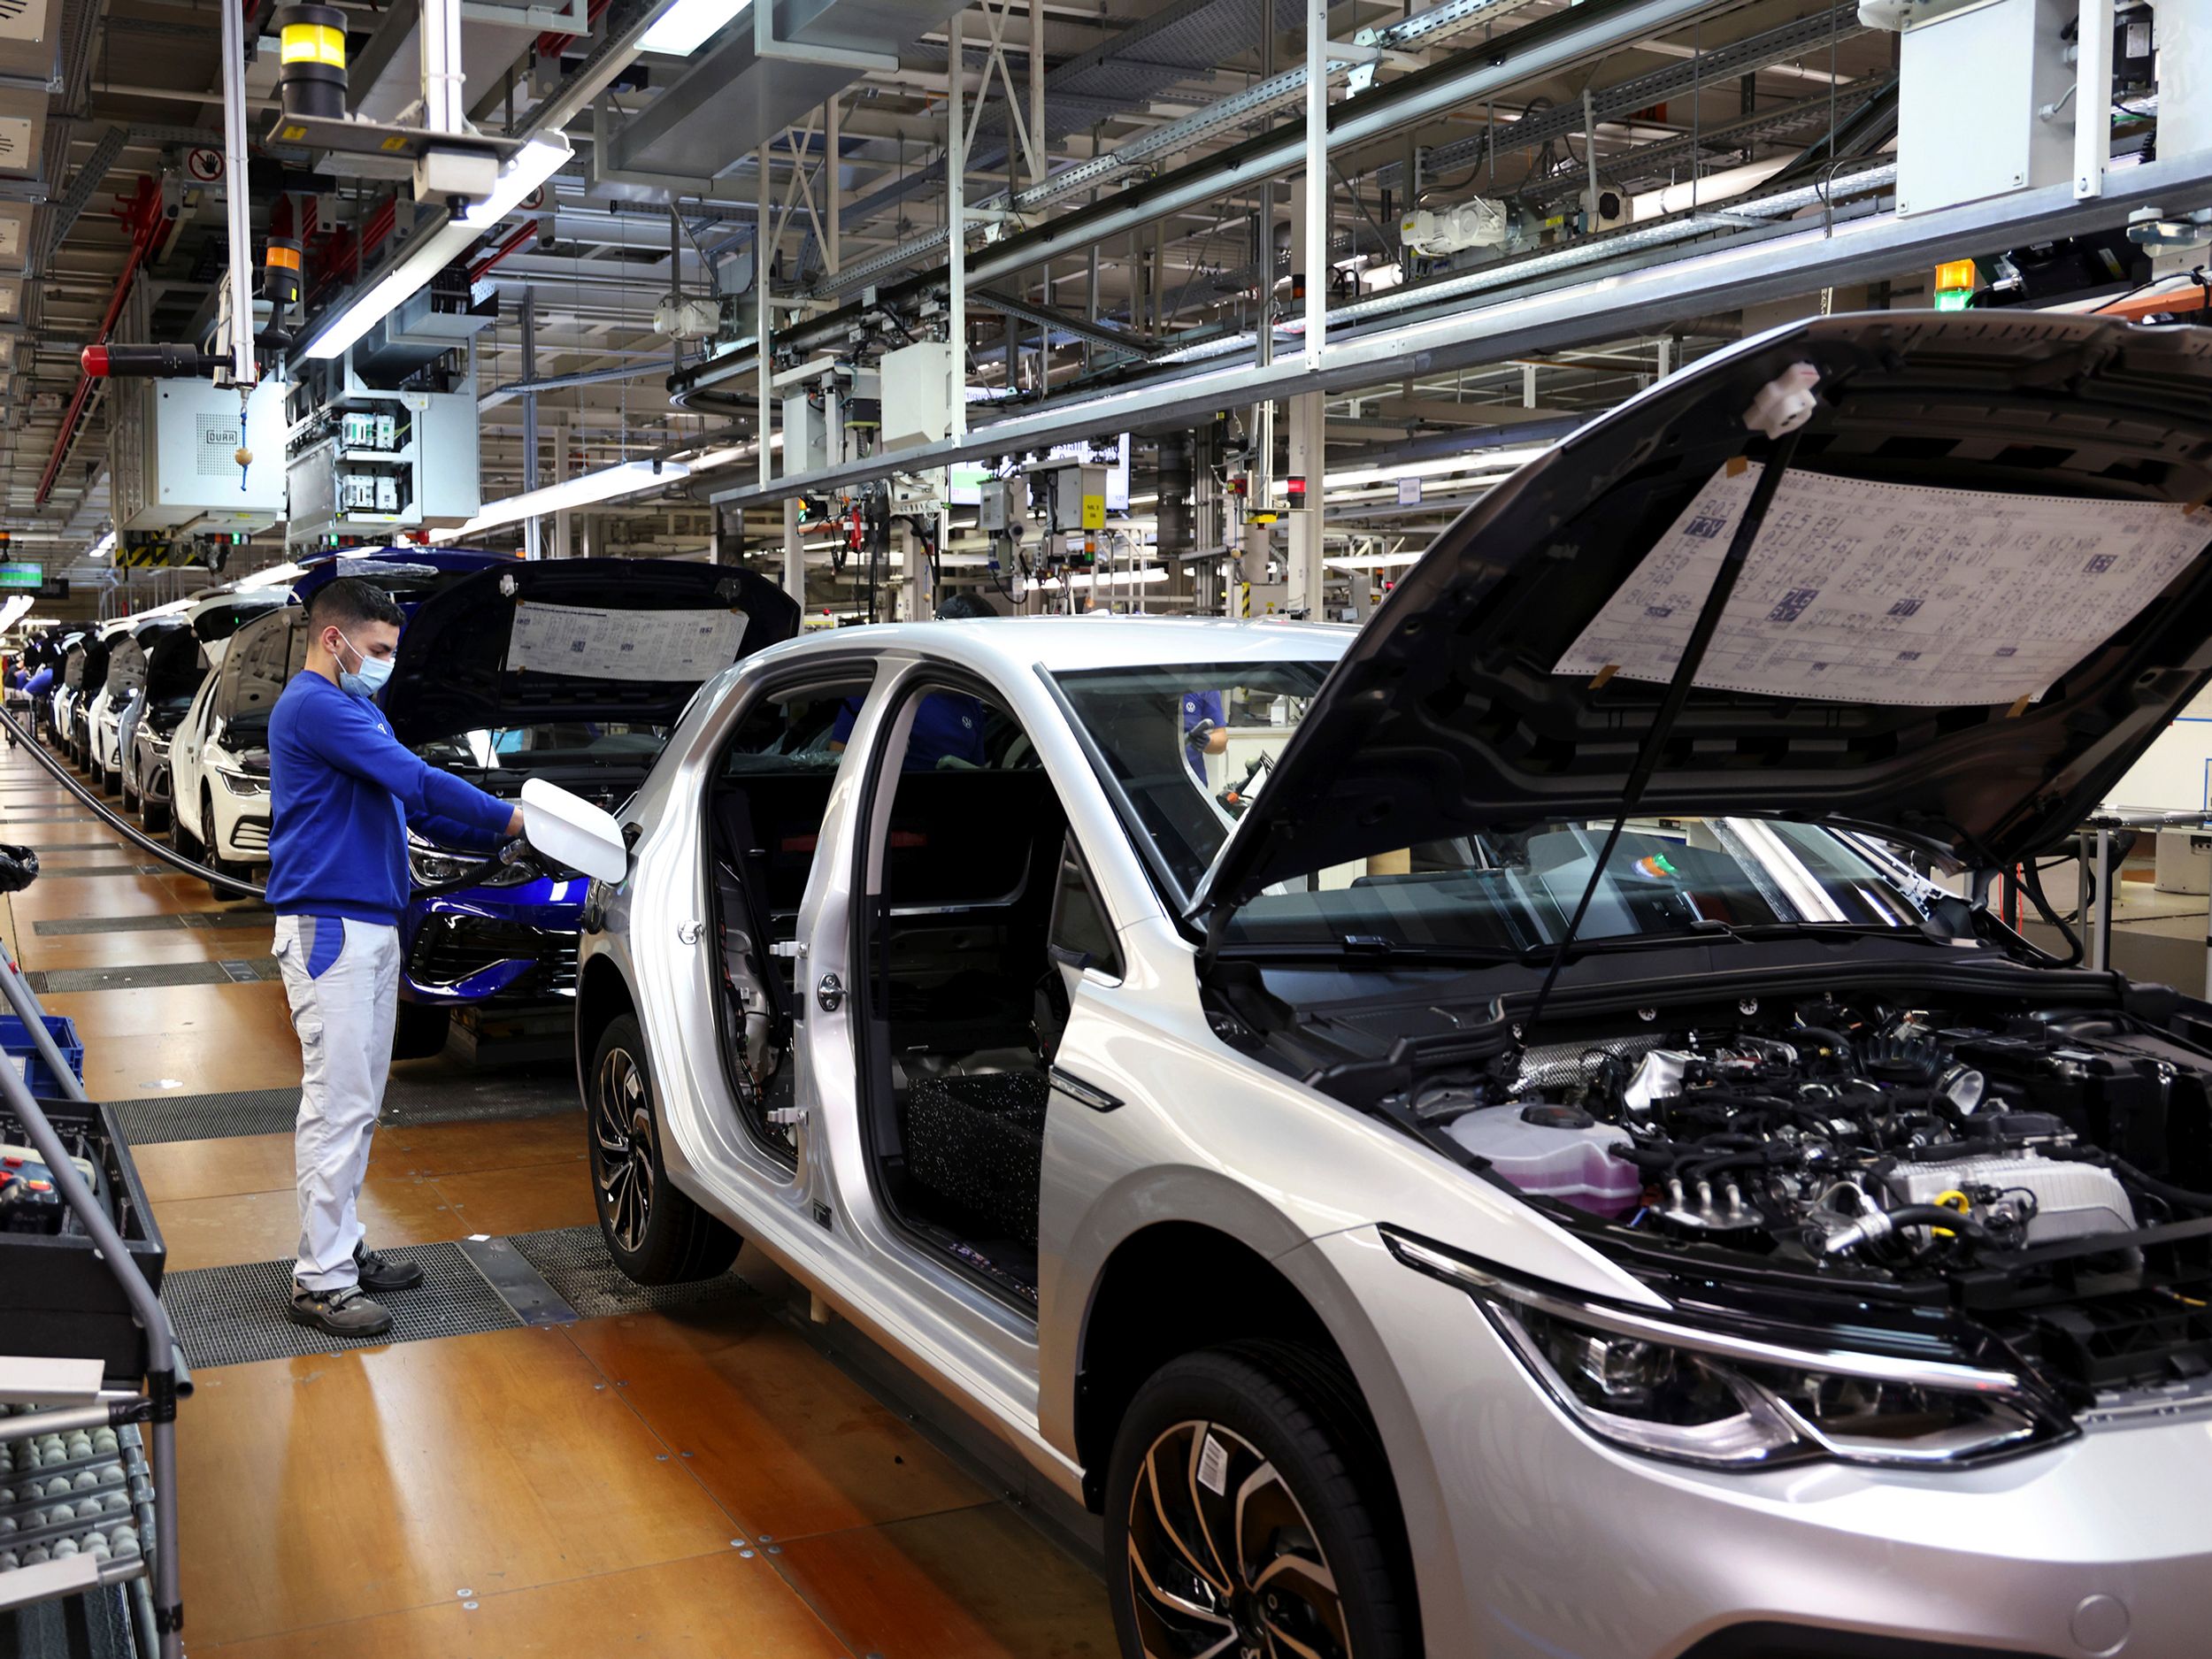 A worker fuels a Volkswagen Golf 8 automobile on the assembly line.